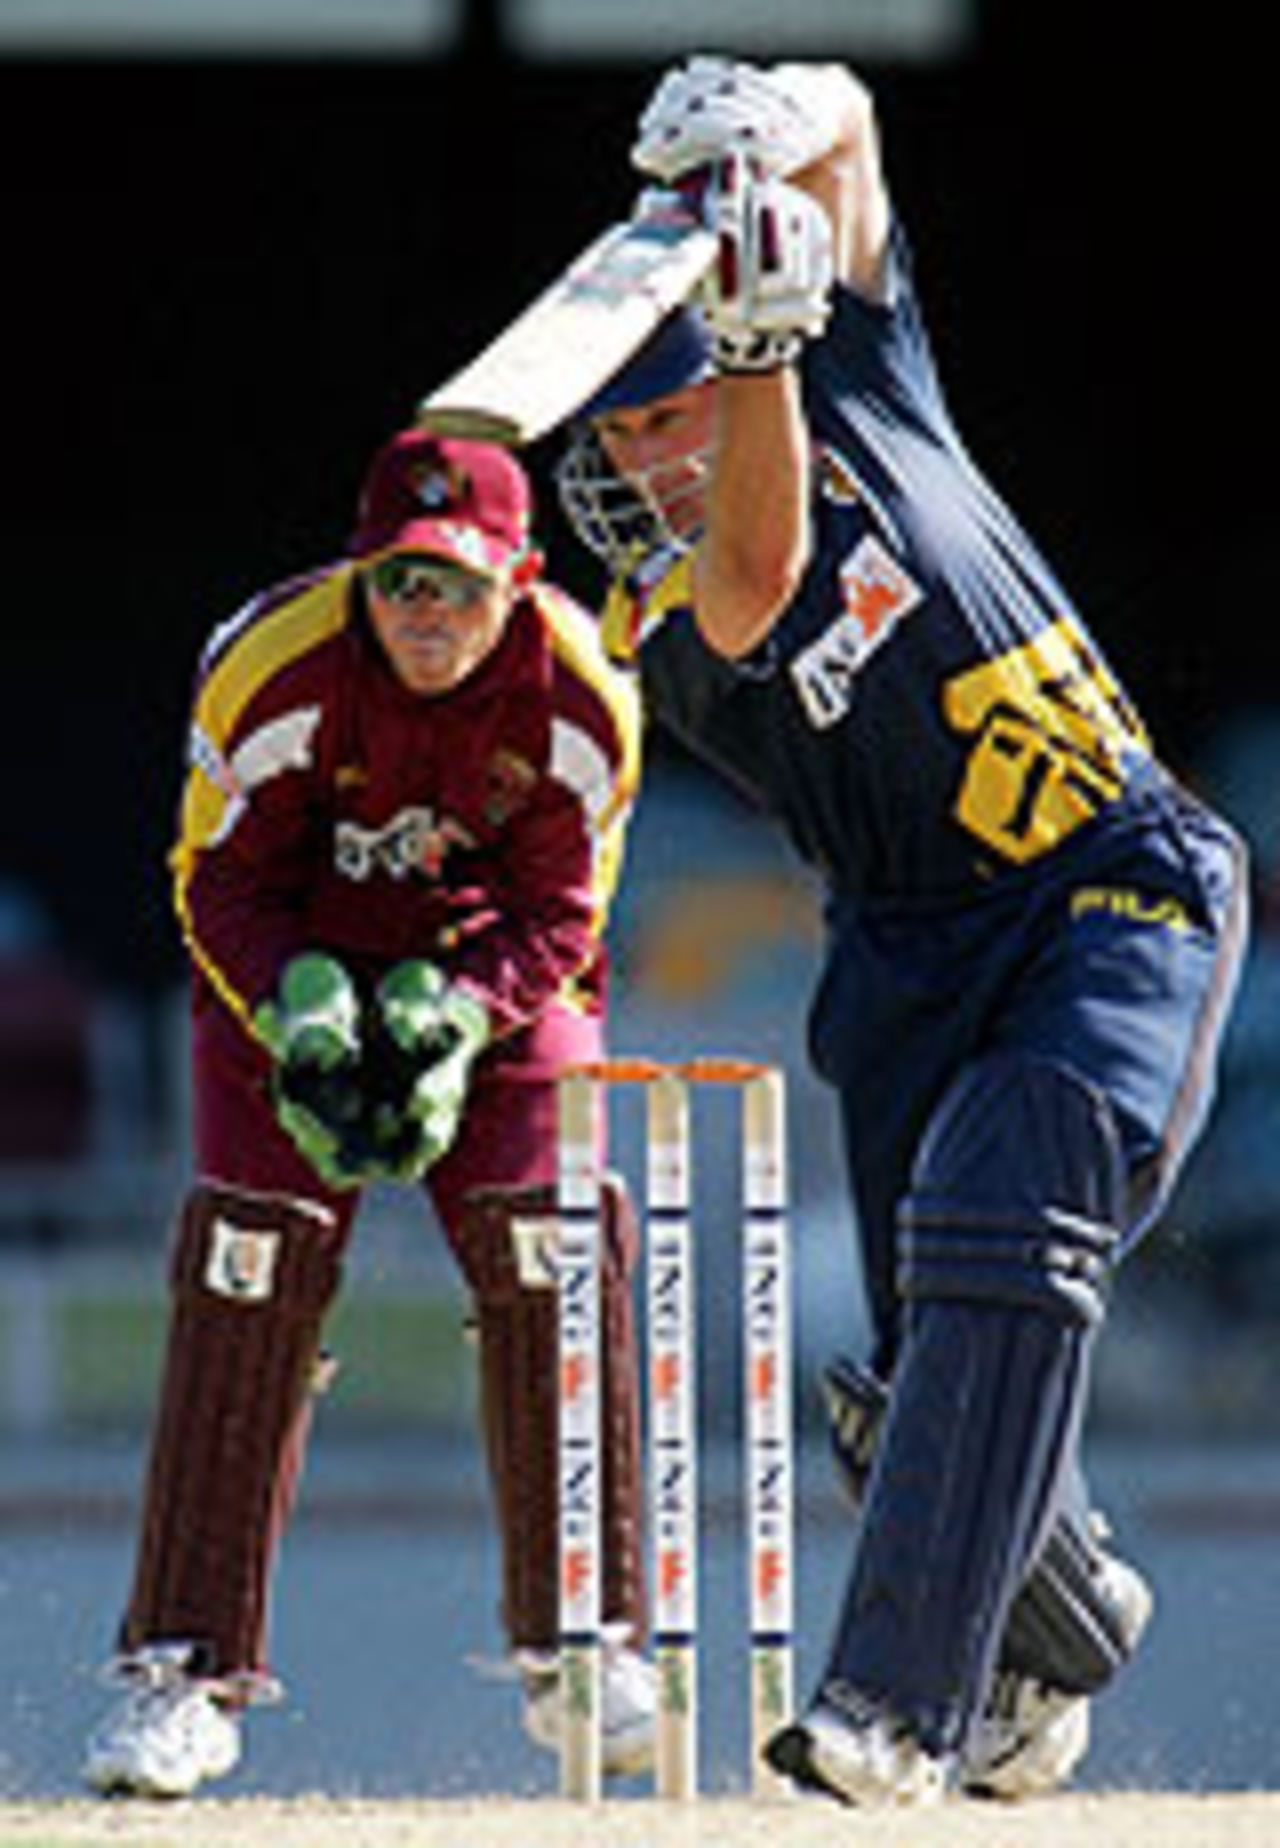 David Hussey launches into a drive, Queensland v Victoria, ING Cup, December 17, 2004